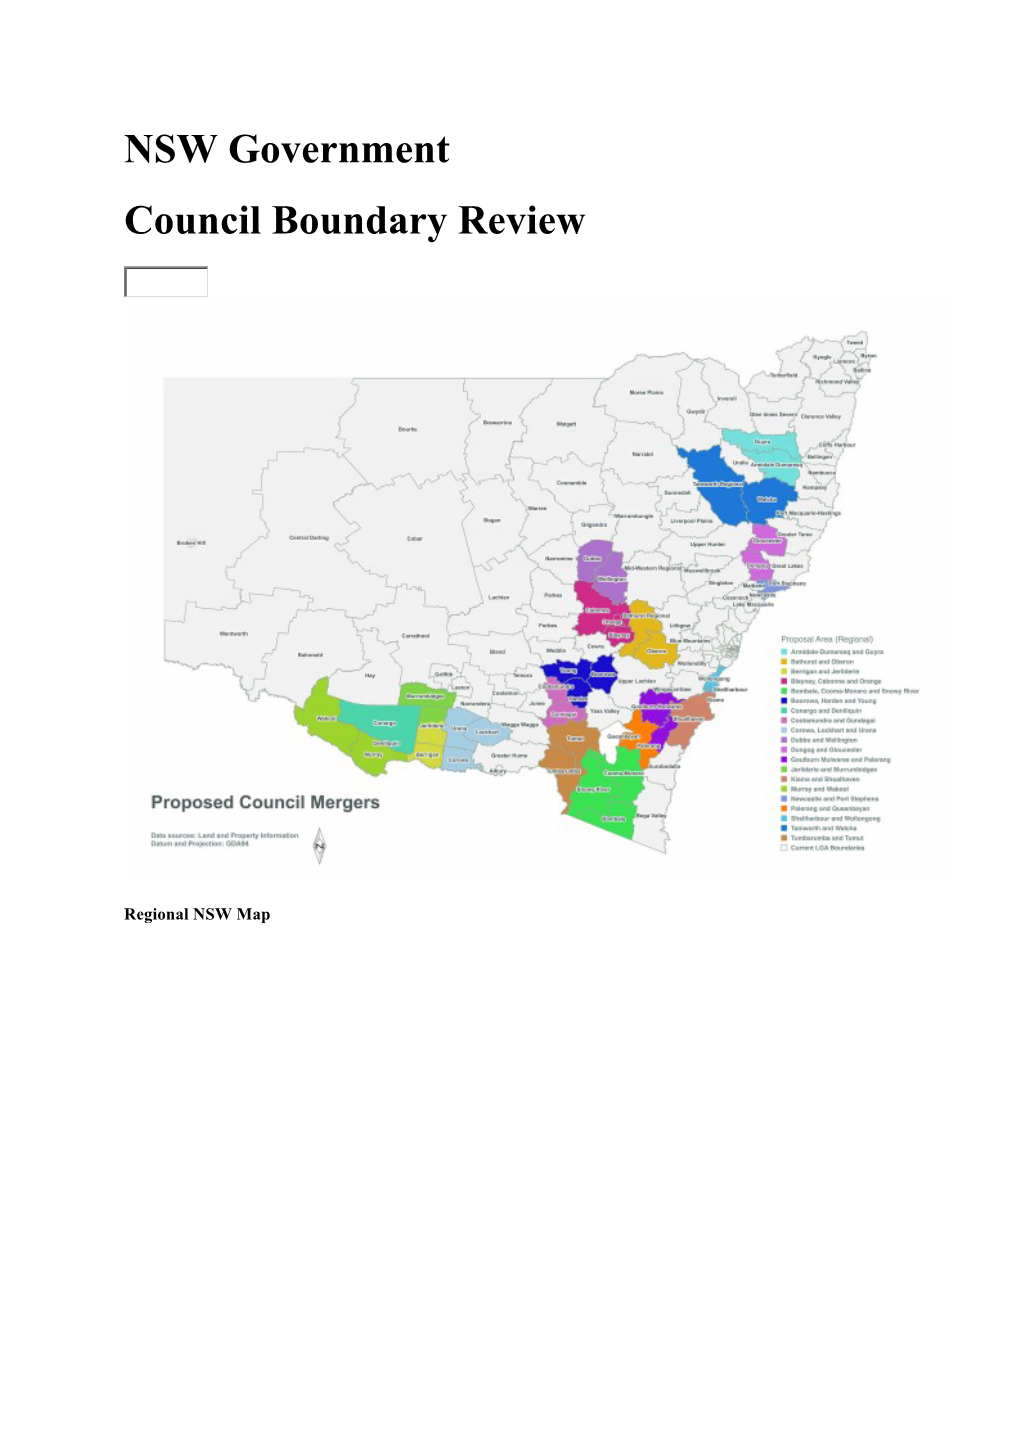 NSW Government Boundary Review